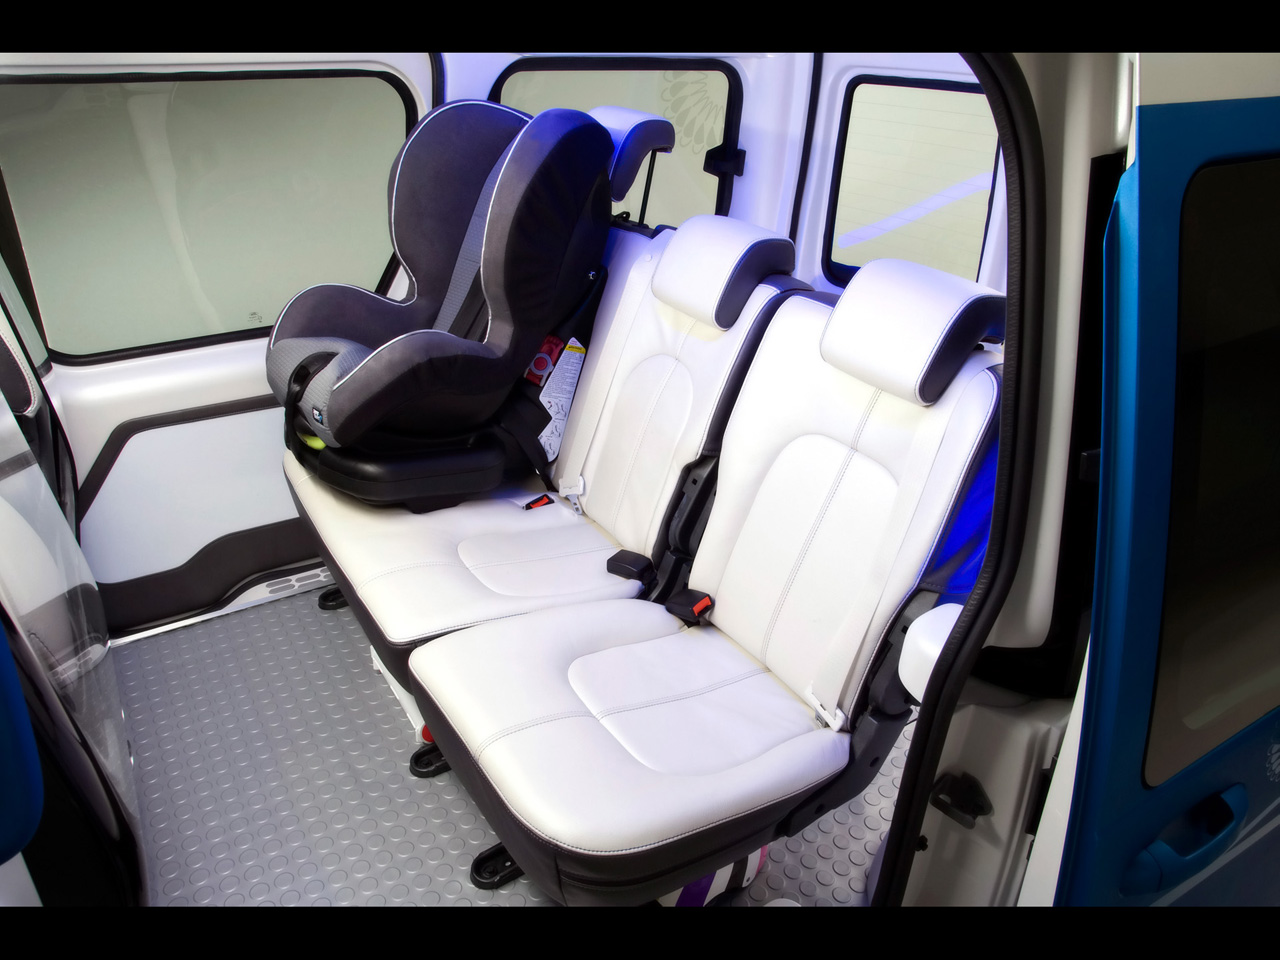 [Images] 2009 Ford Transit Connect Family One Concept 2009-Ford-Transit-Connect-Family-One-Concept-Seats-1280x960